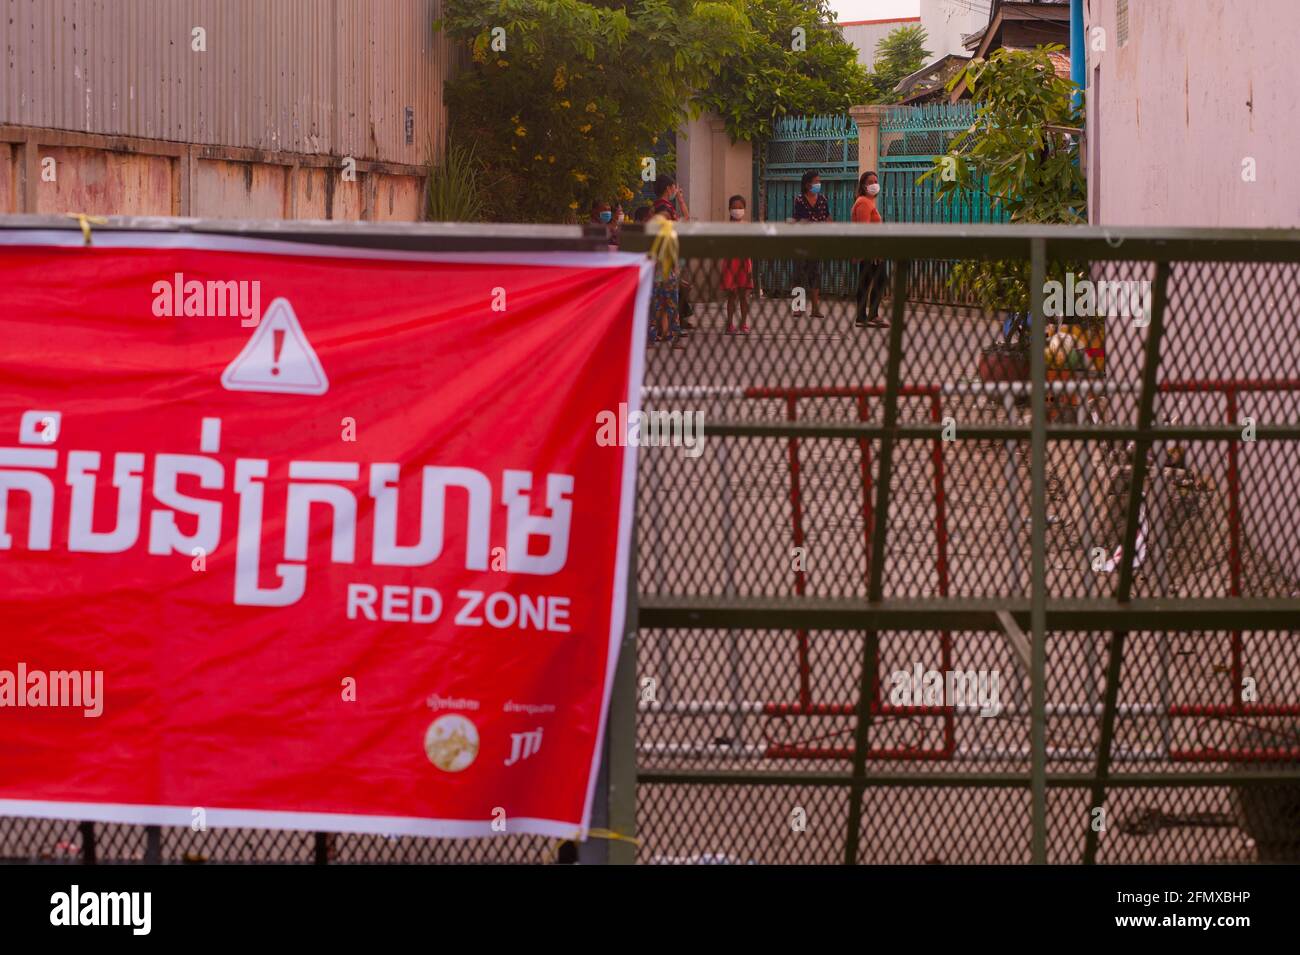 Phnom Penh, Cambodia. May 12th, 2021. after 4 weeks of the city being in total lockdown, the government has continued to divide Phnom Penh into 3 color zones (red, orange & yellow) due to the ongoing COVID - 19 surge. a Cambodian family is in quarantine behind a police checkpoint w/ a large colorful bilingual banner that lets people know this is the entrance to a 'Red Zone', meaning high risk of infection. credit: Kraig Lieb / Alamy Live News Stock Photo